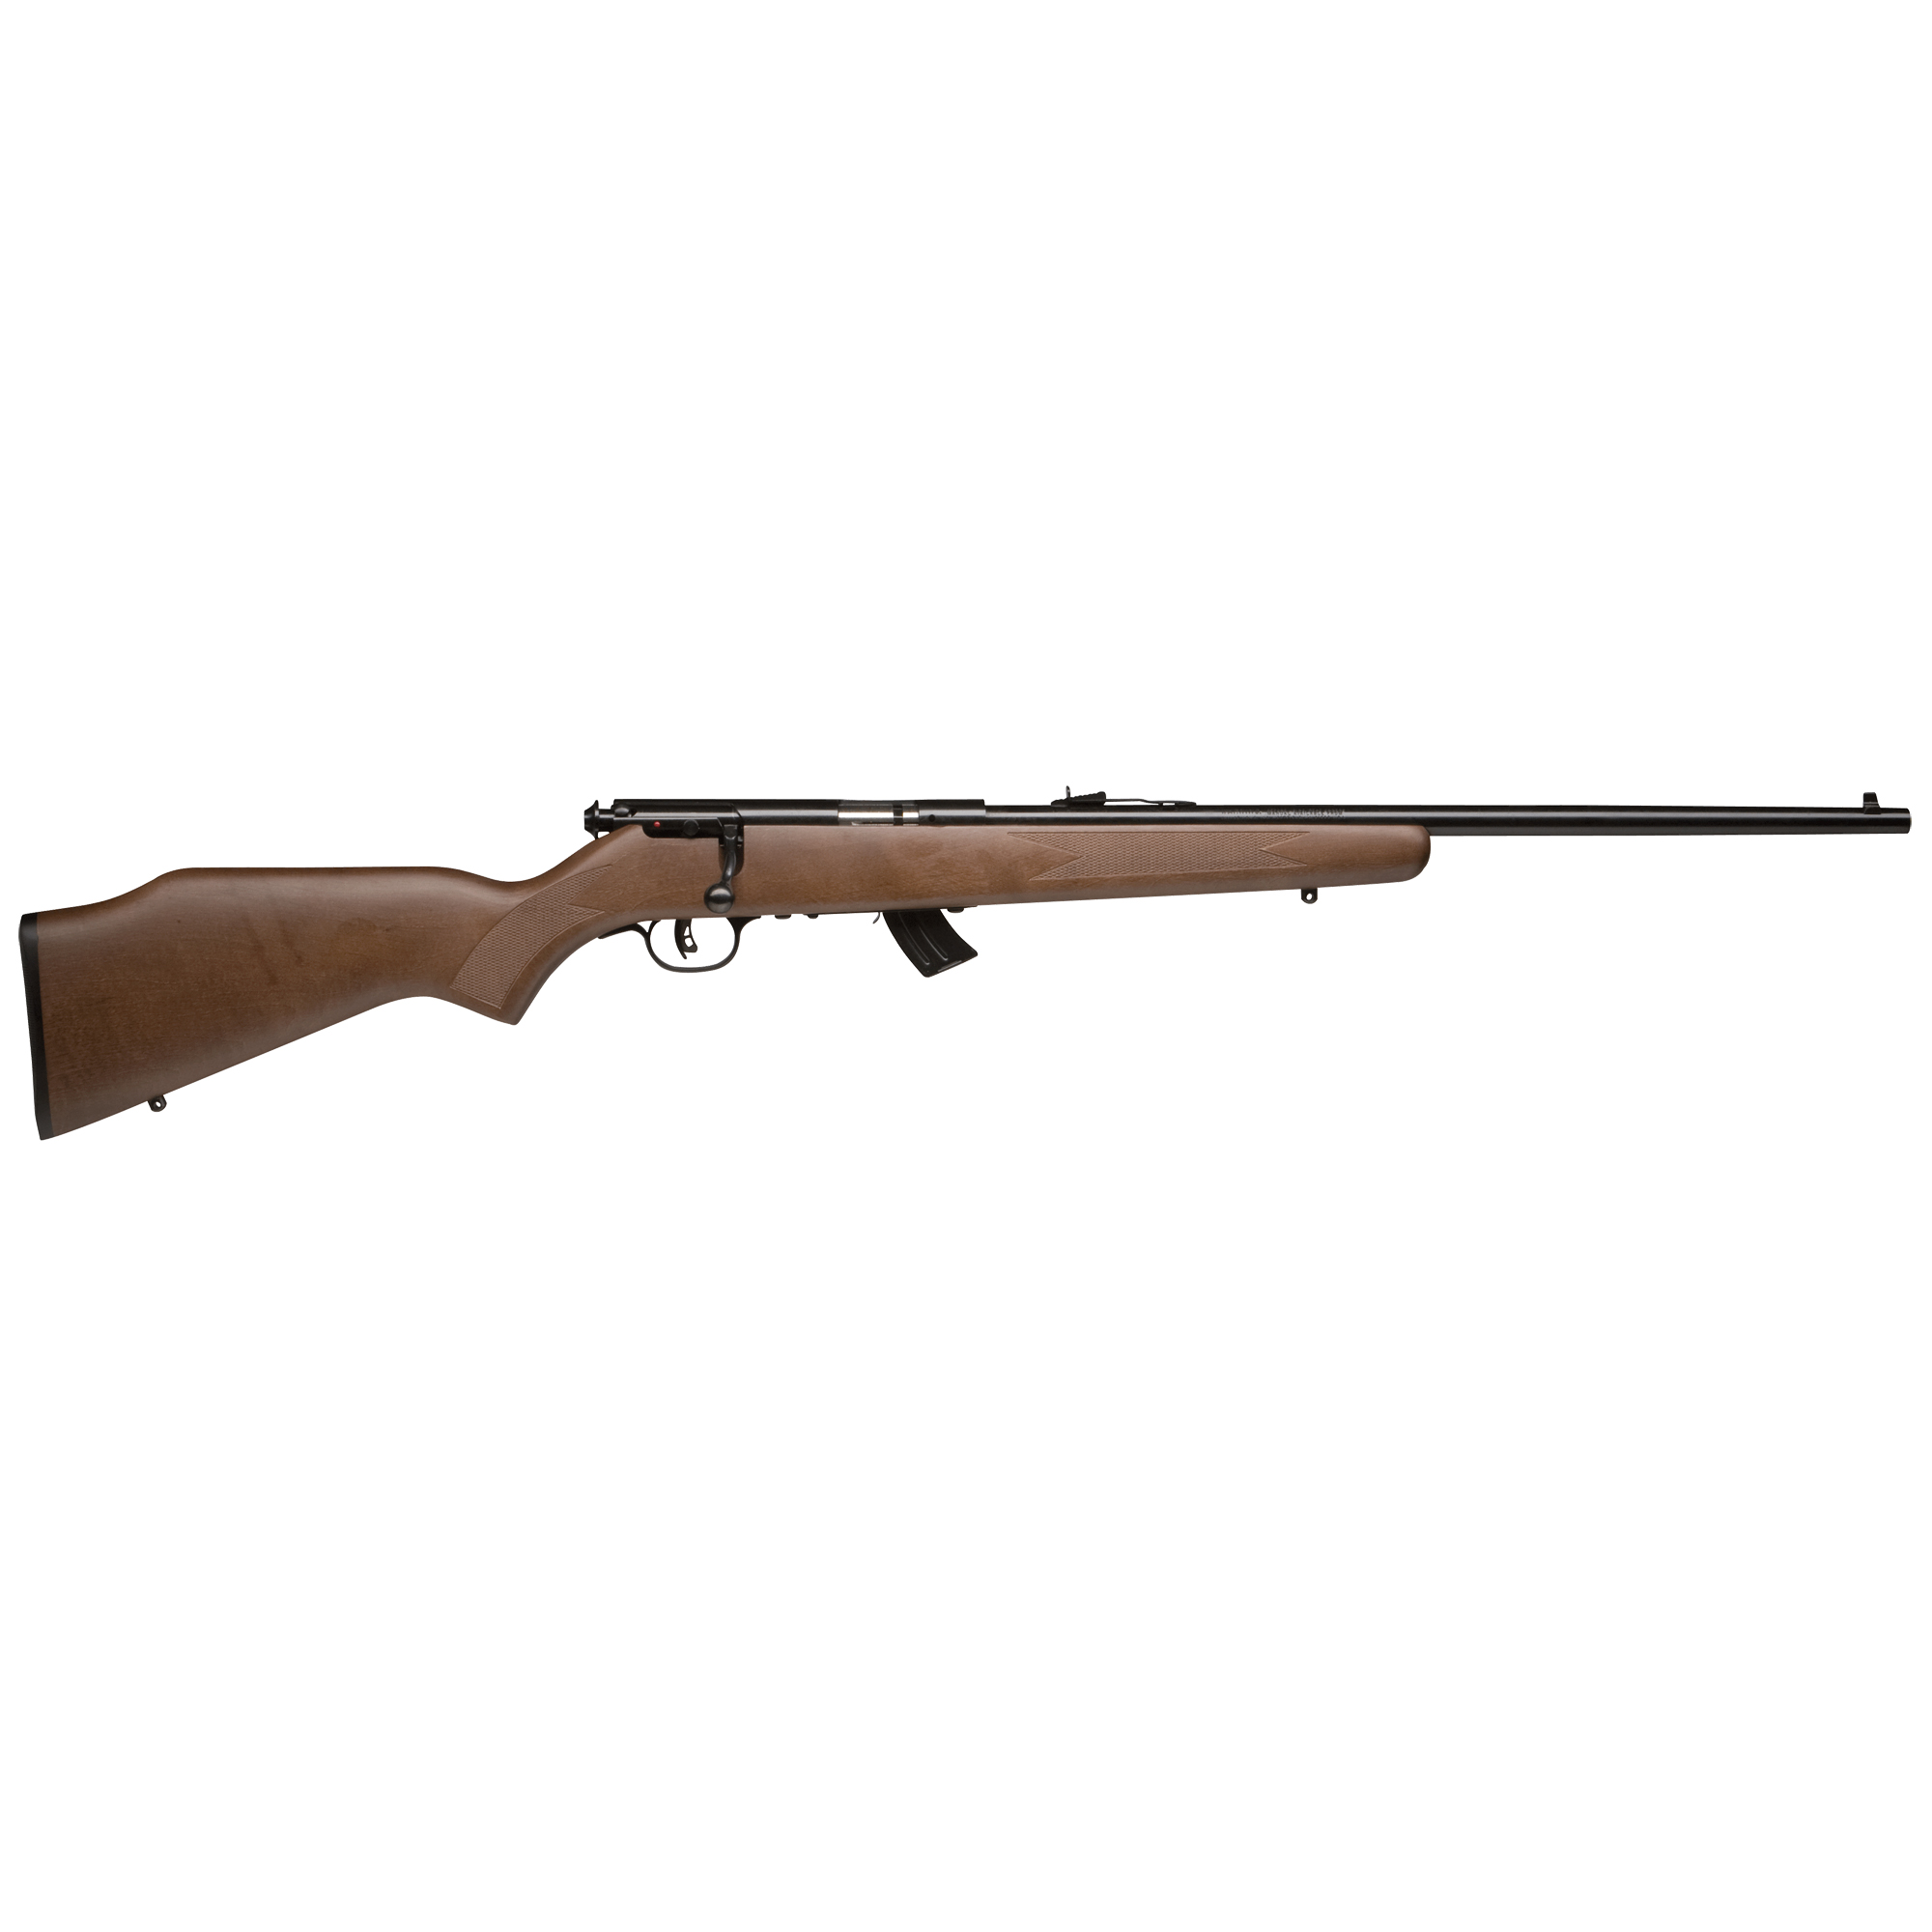 SAVAGE ARMS MKII-G 22LR 10RD BL/WD AT